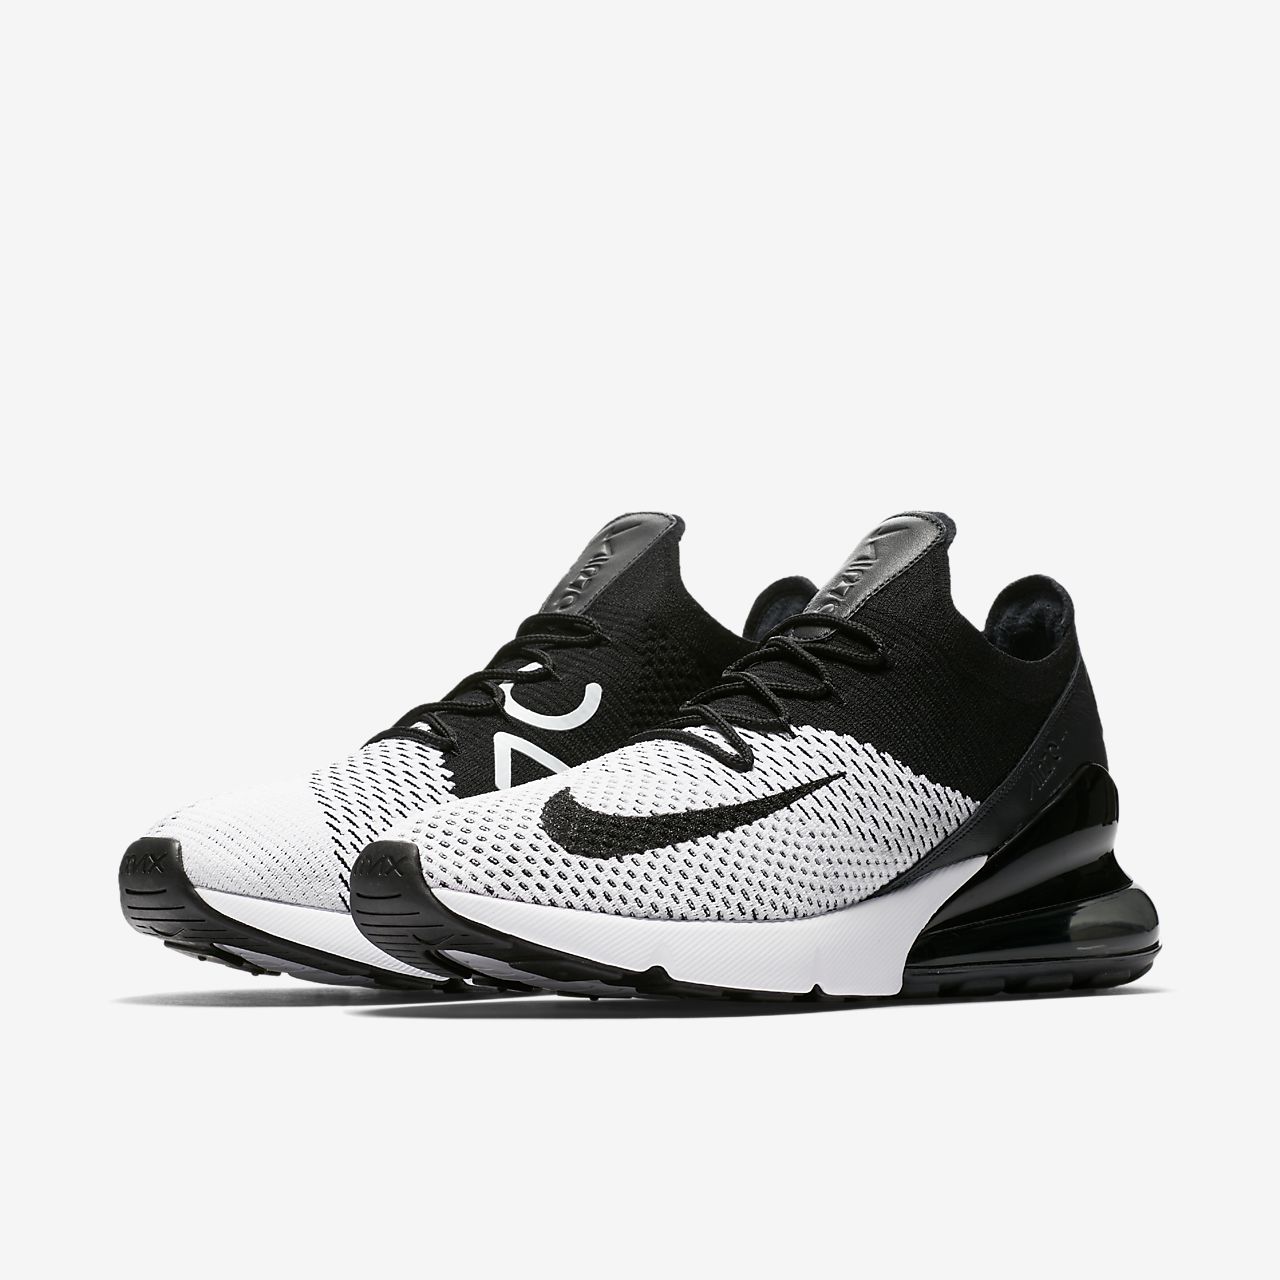 Gris Nike Air Max 270 Chaussures Taille 35 Hommes kHdaf